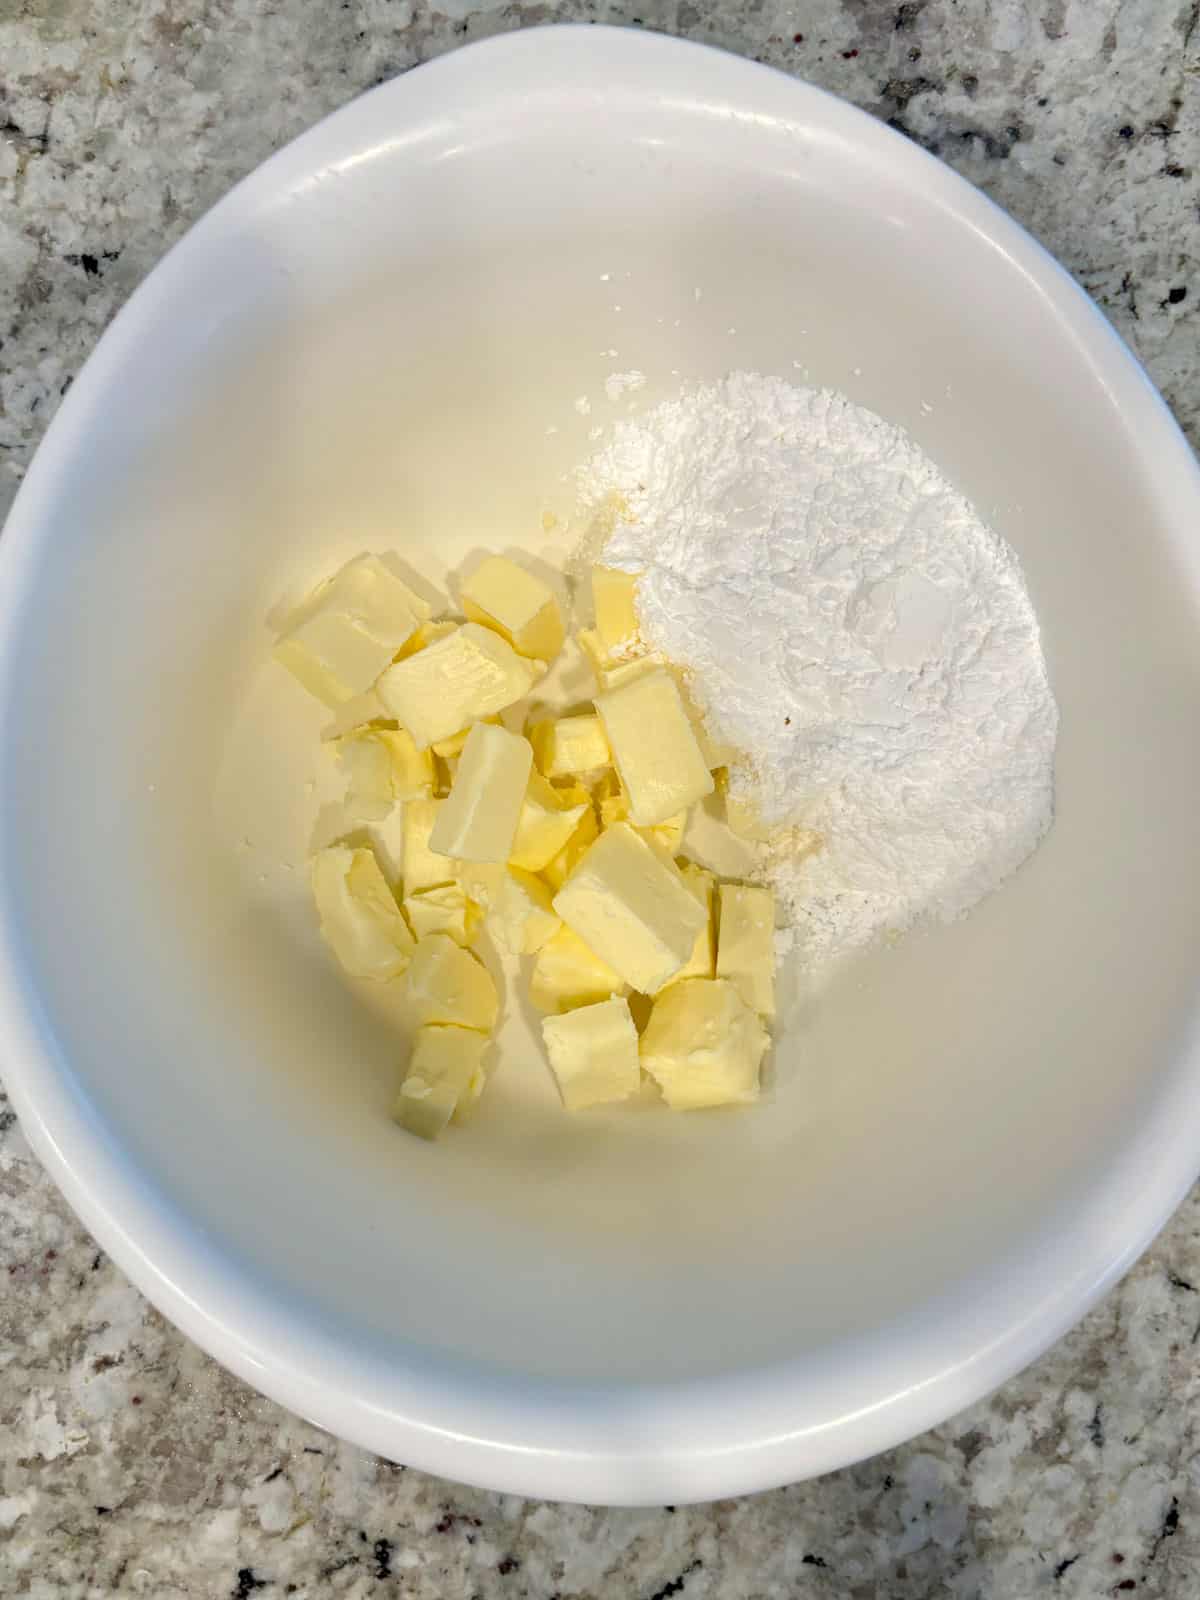 White bowl with butter and powdered sugar in it on the counter.